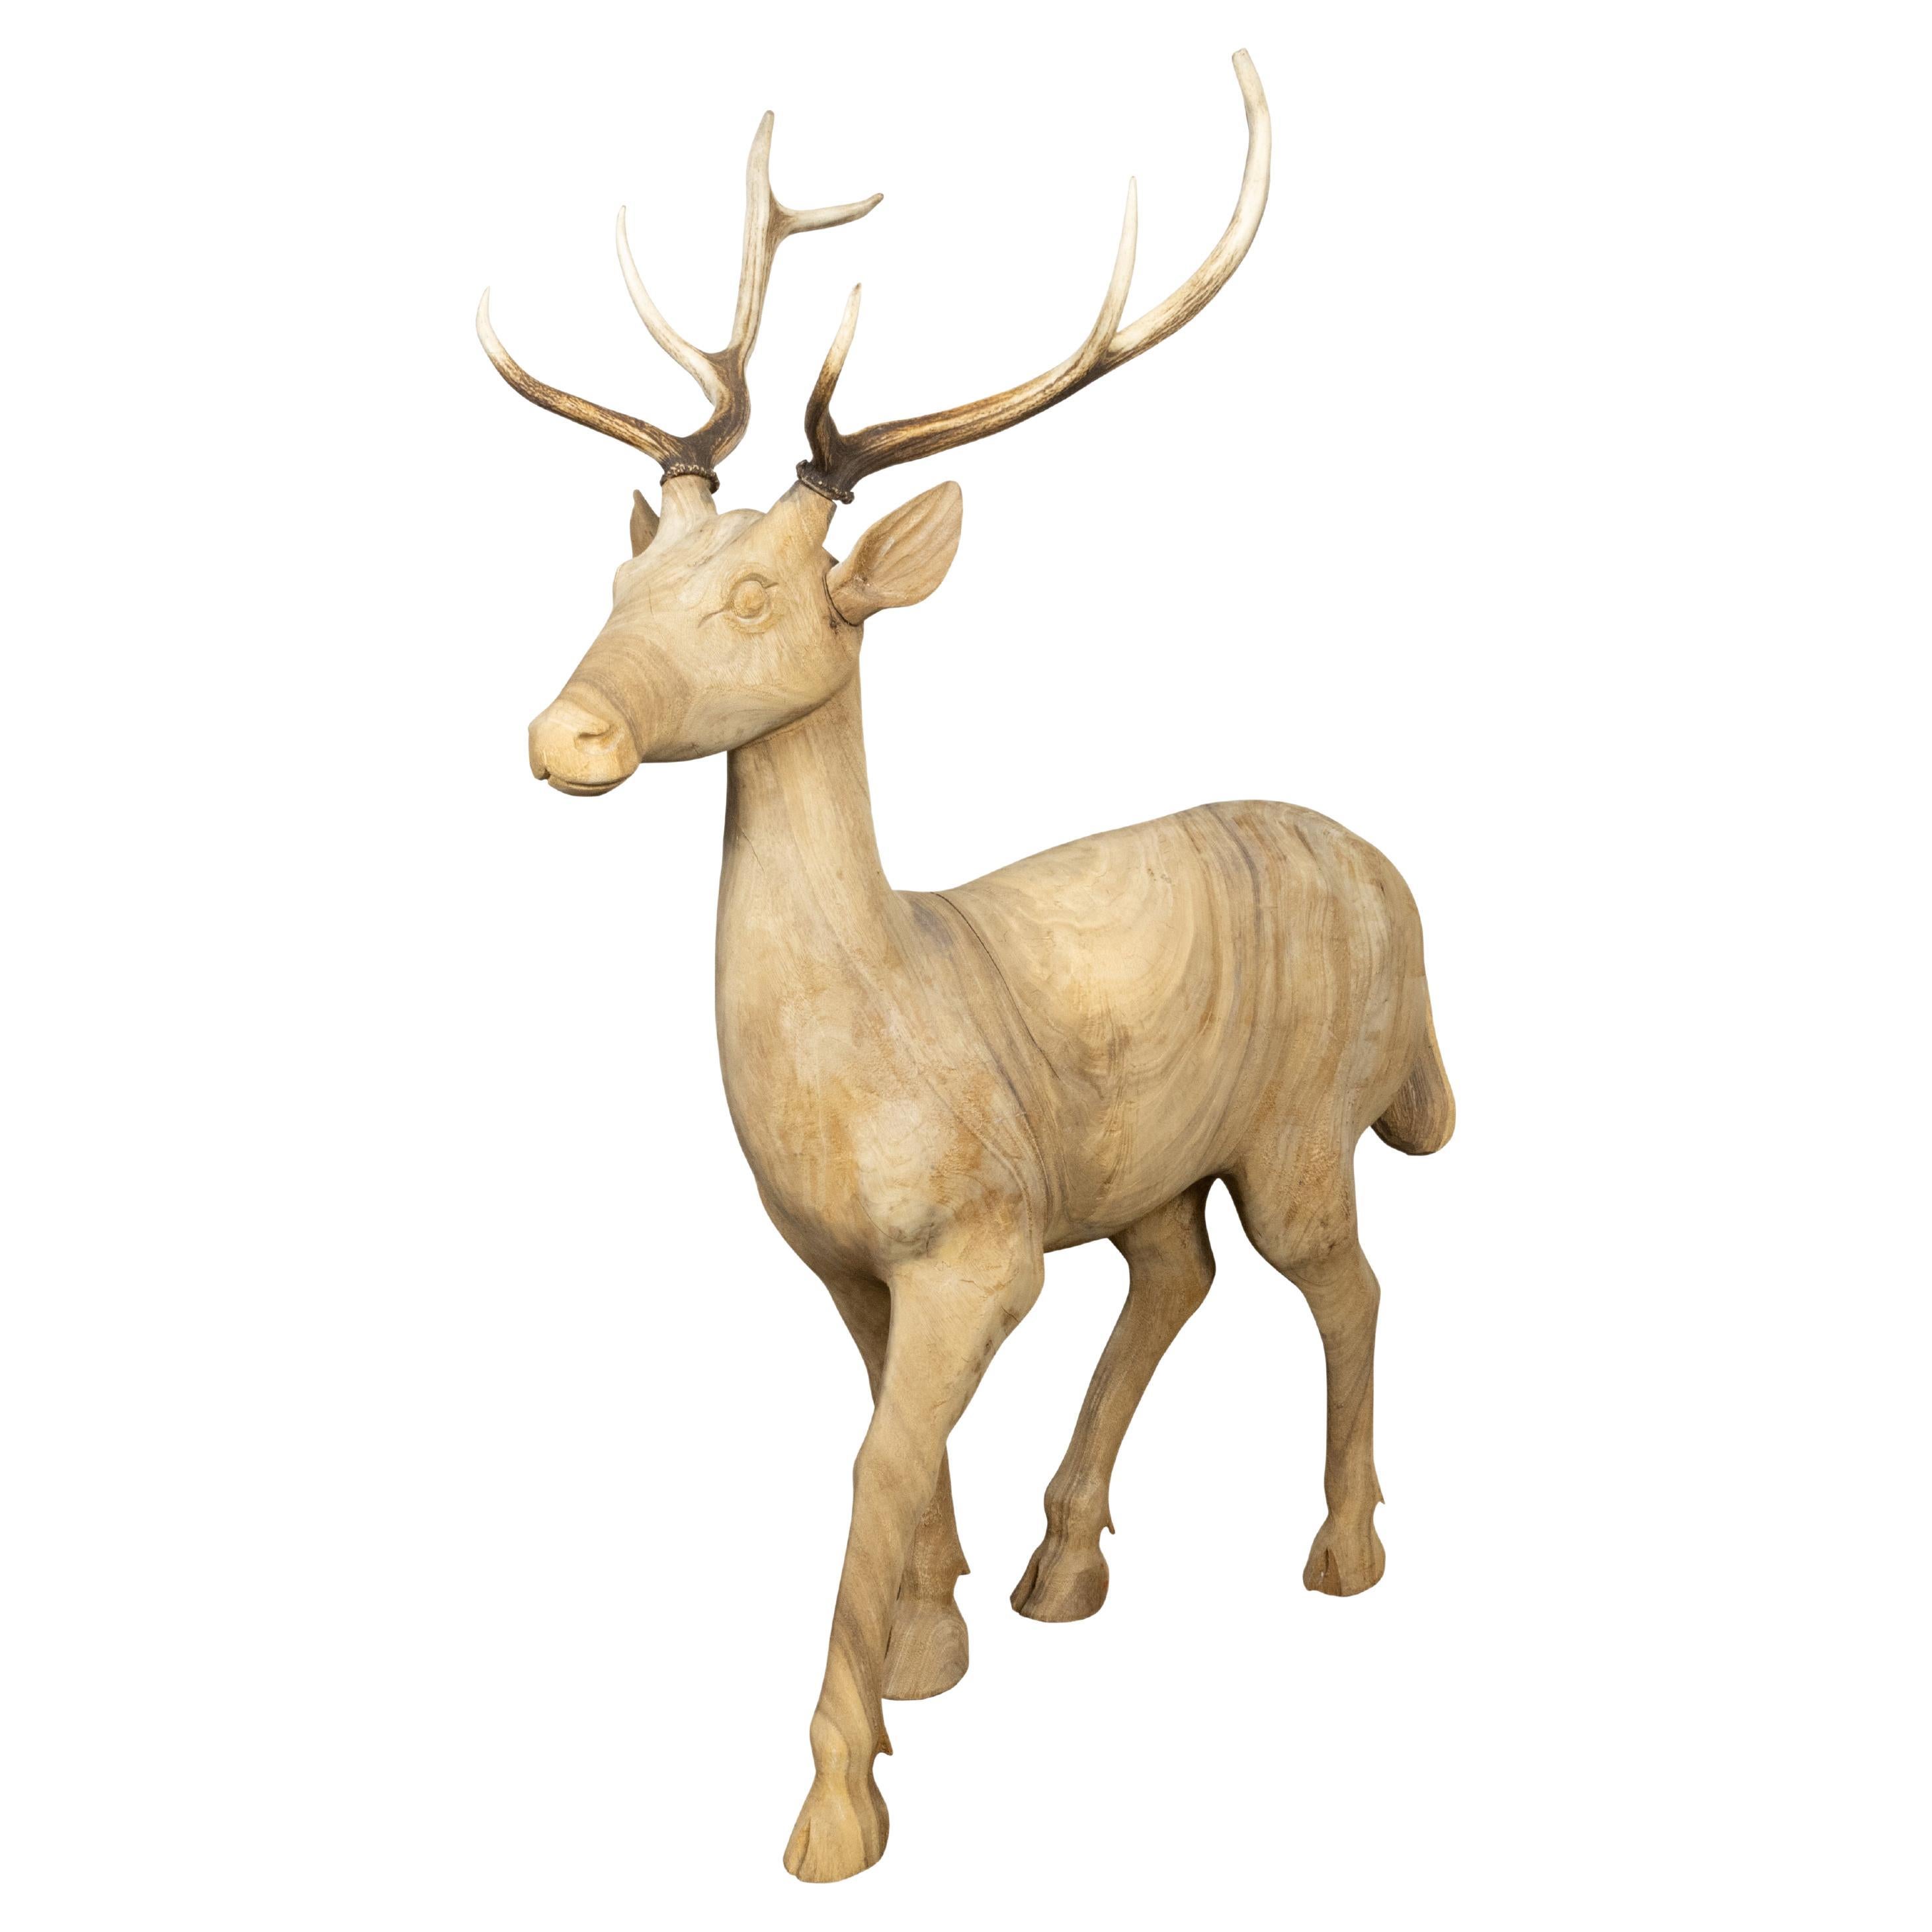 Vintage Midcentury Sculpture of a Walking Stag with Antlers and Natural Patina For Sale